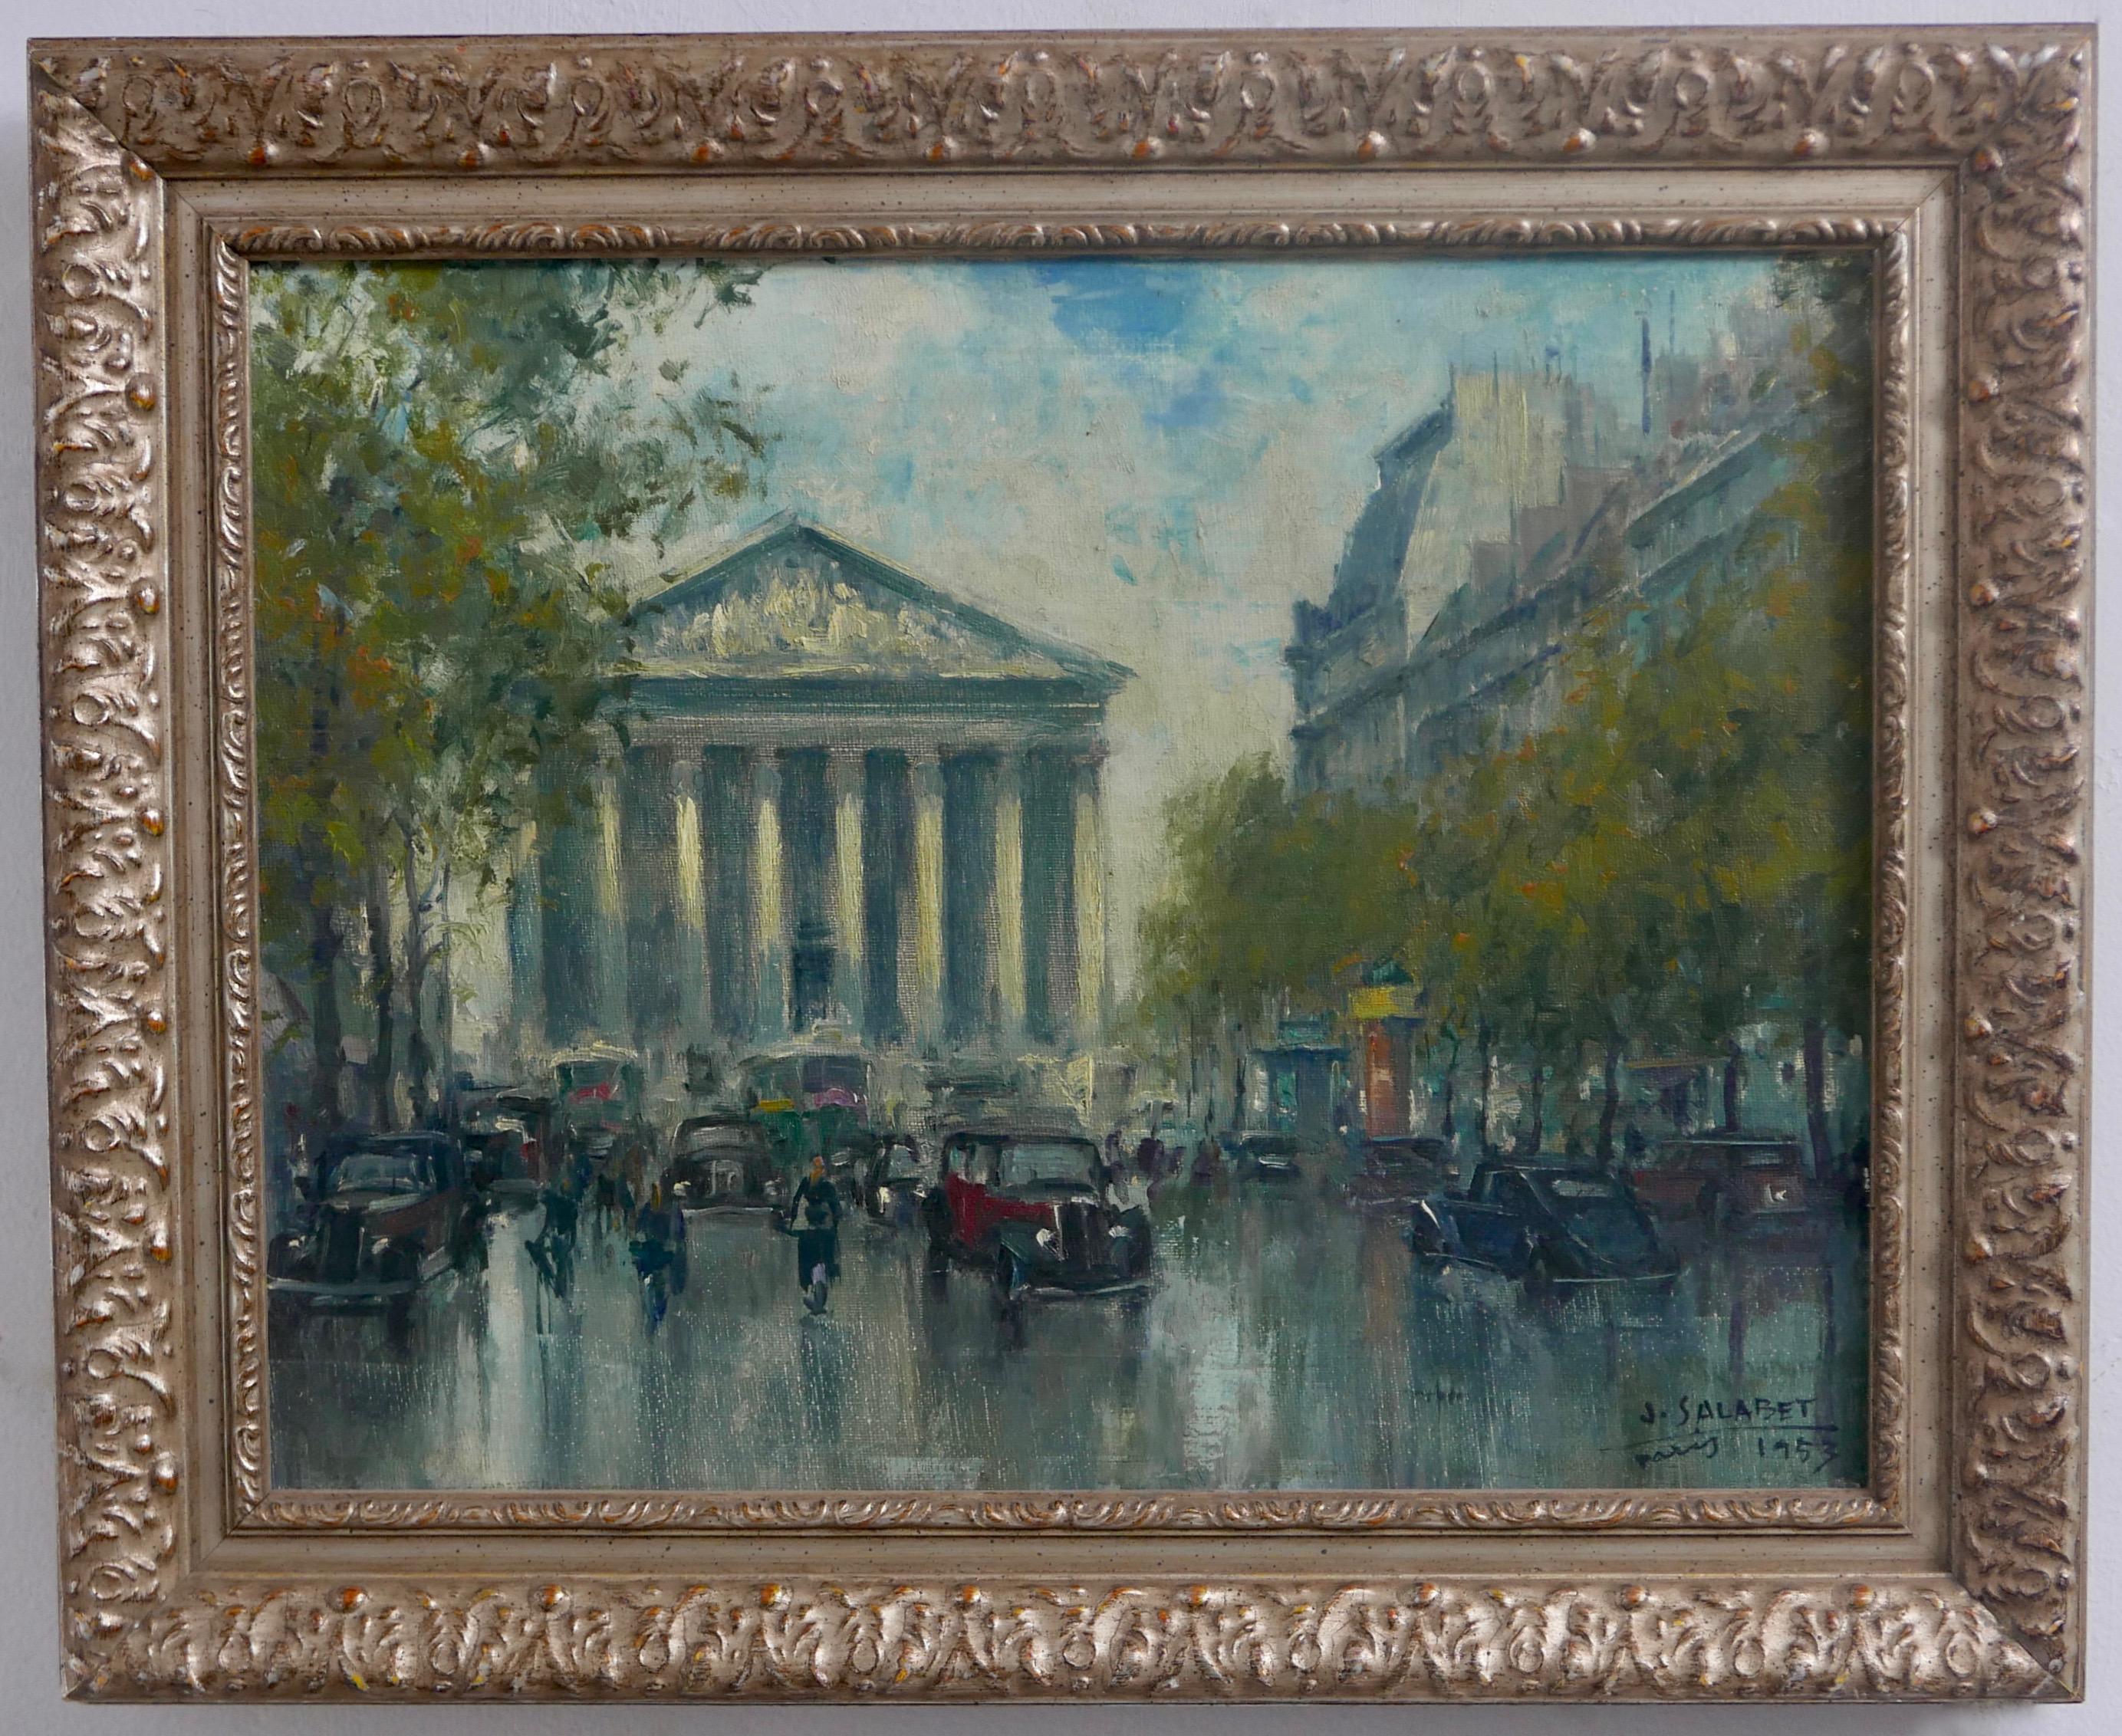 A charming oil on canvas painting of 'La Madeleine' by Jean Salabet.
Signed LR : J. Salabet, Paris, 1953
Measures: 11 x 14 unframed

Jean Salabet was a French, 20th century artist born in 1900. Salabet was a Parisian painter mostly known for his